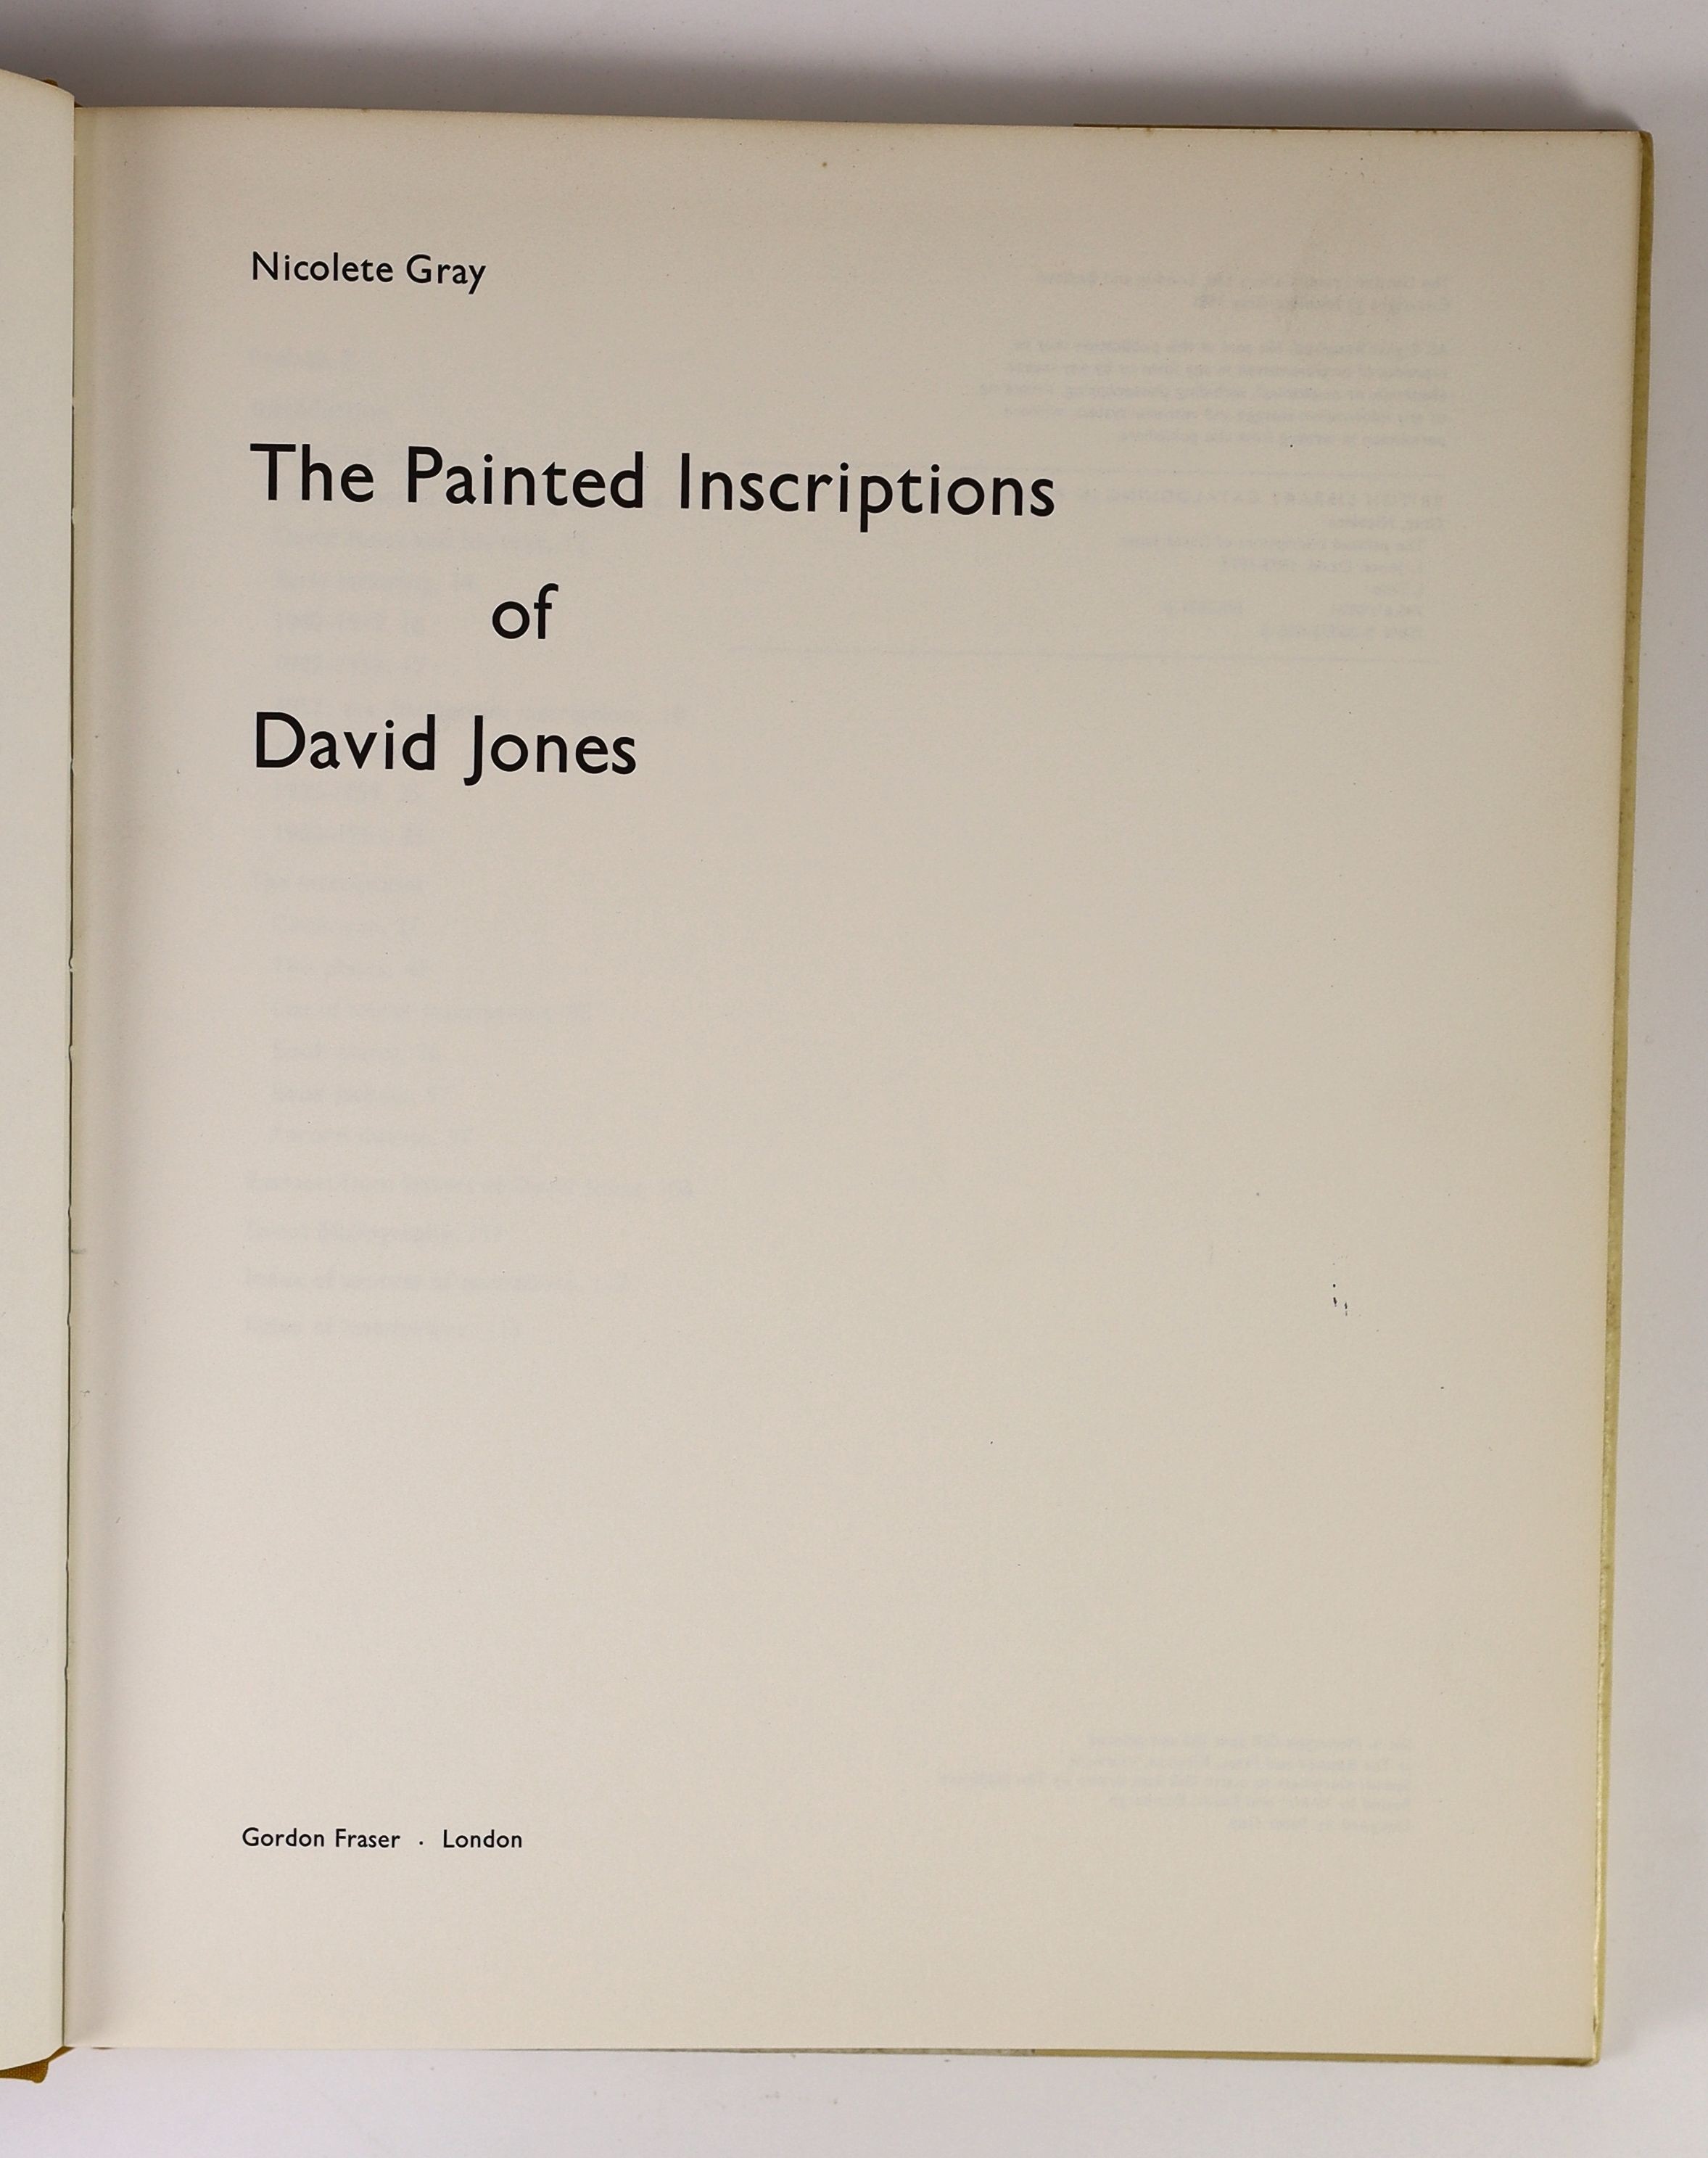 Gray, Nicolete - The Painted Inscriptions of David Jones. 1st edition. Complete with numerous text illustrations. Quarter cloth and marbled paper boards with letters direct on upper and spine. Original titled and illustr